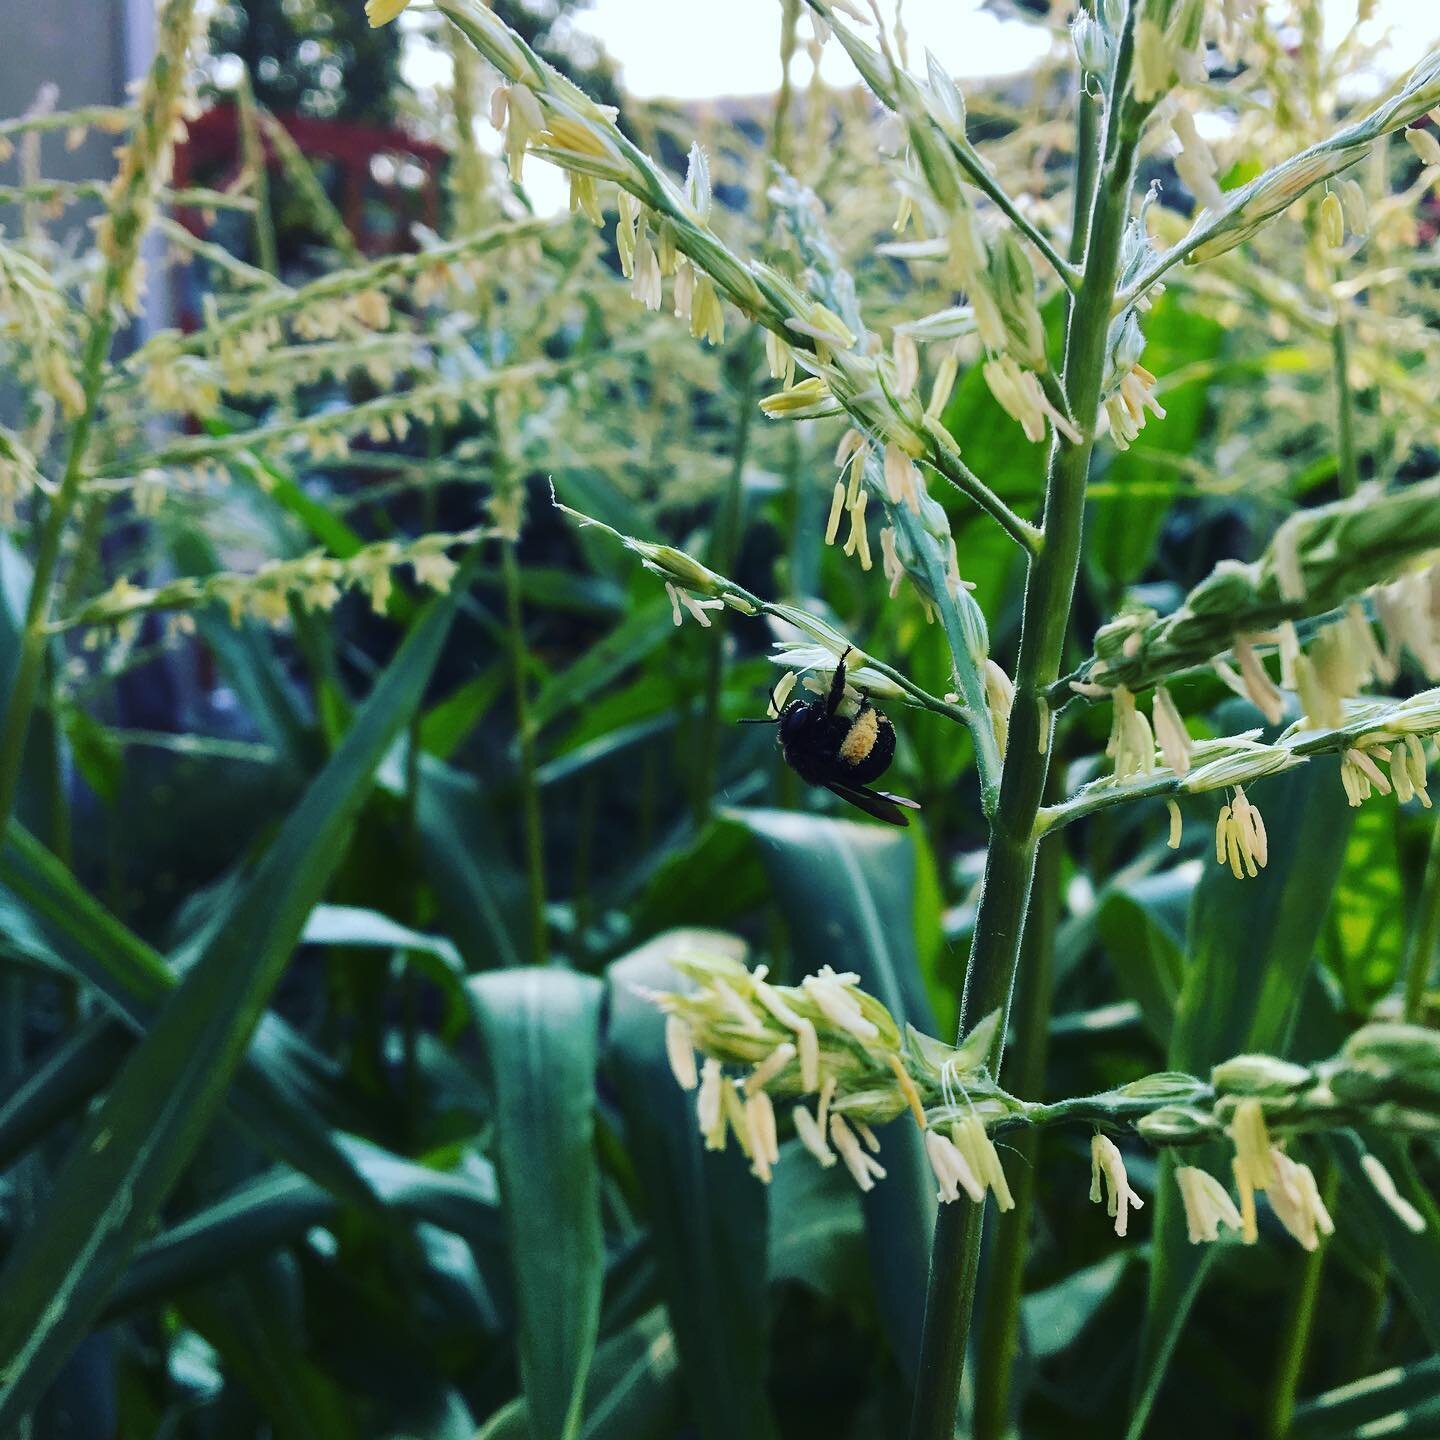 Native bee collects pollen from corn in my garden.
Which proofs the point: pesticides used in corn fields can harm native pollinators. (Probably honeybees too).